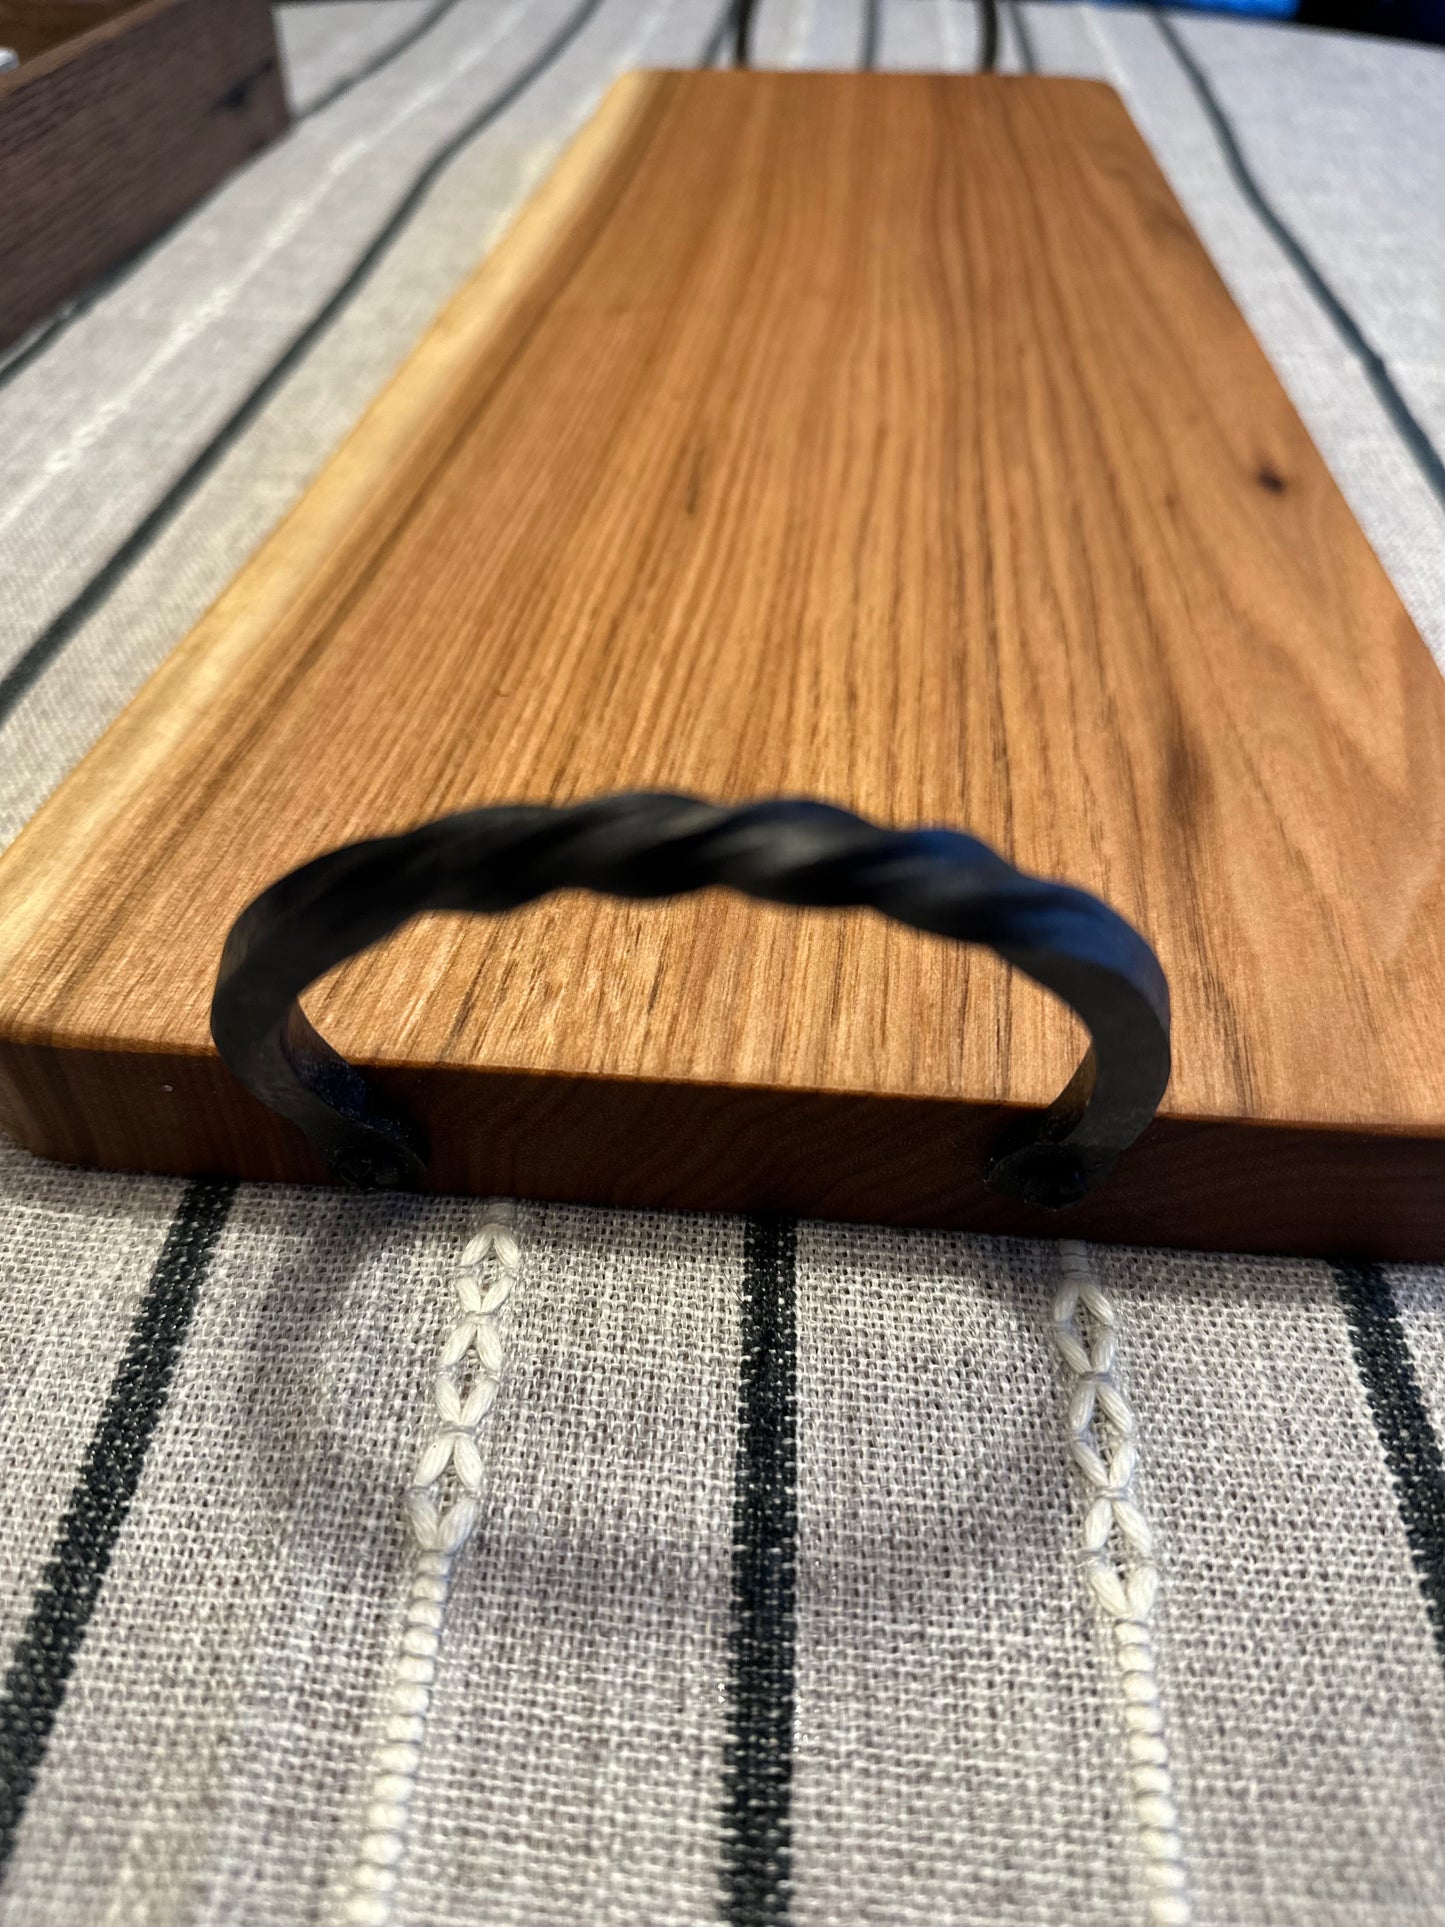 Butternut tray with handles